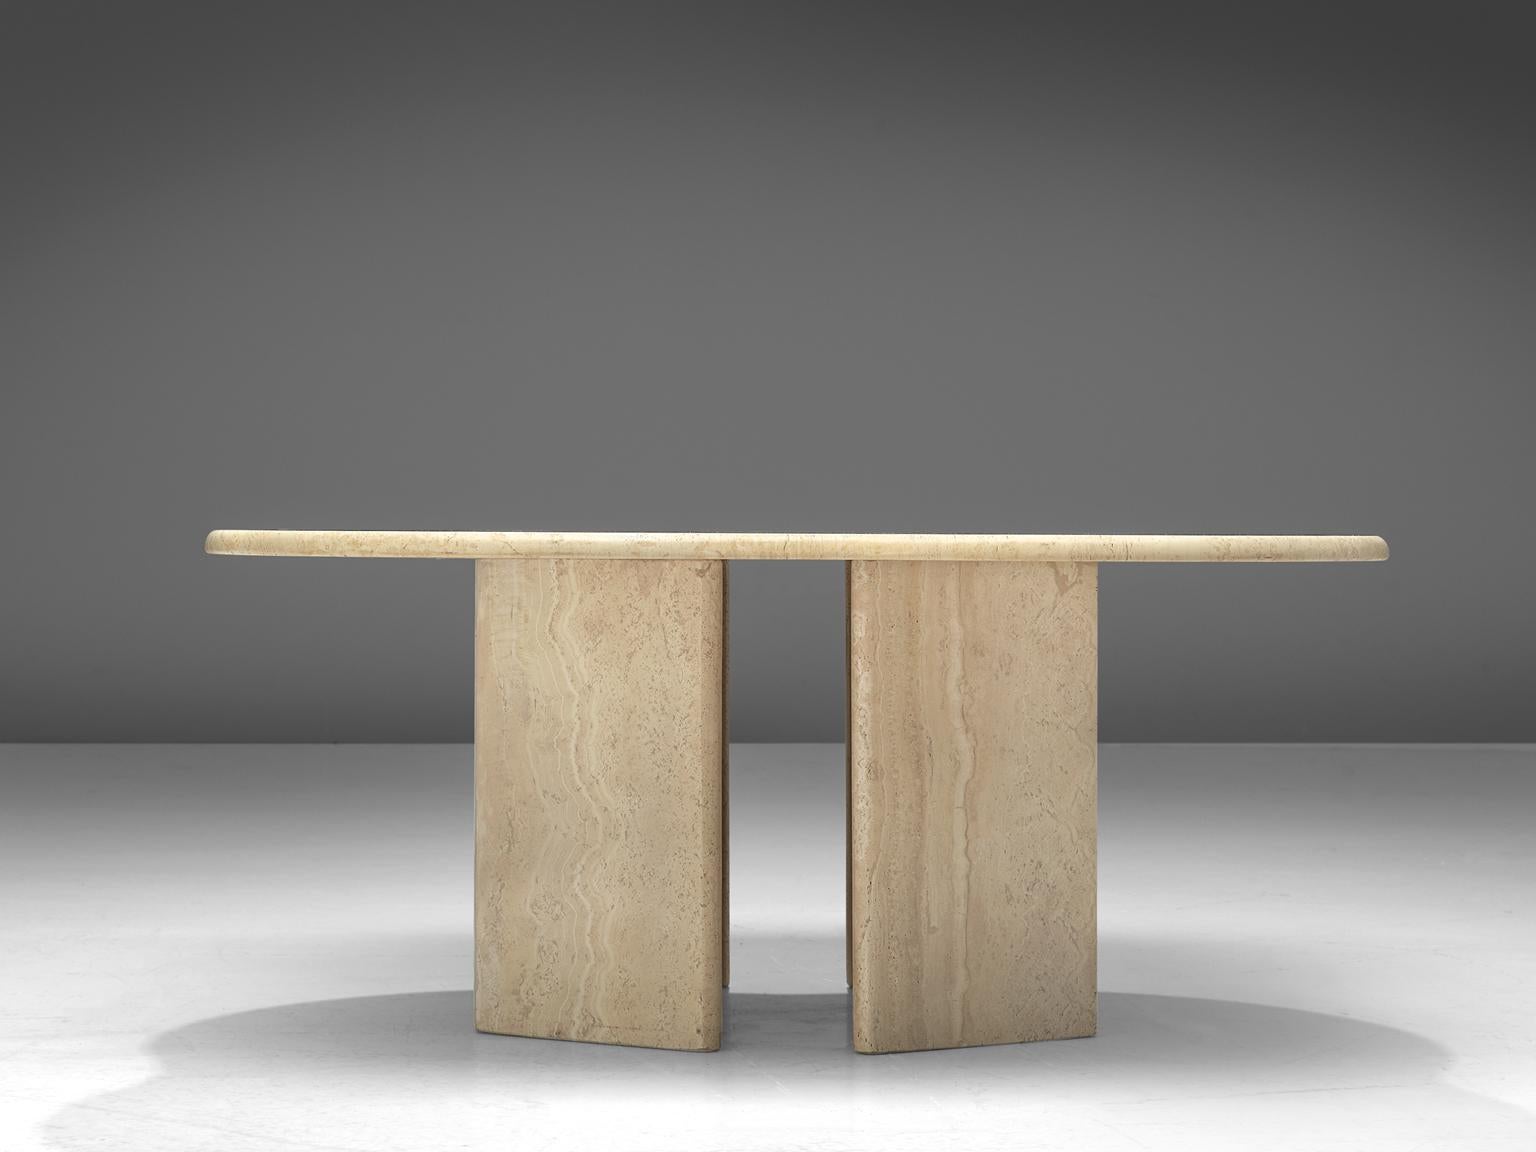 Coffee table, travertine, Europe, 1970s. 

Stunning coffee table with a clover shaped table top. The organic shaped table top forms a strong contrast with the angled, architectural base, consisting of two legs. It is a very architectural piece